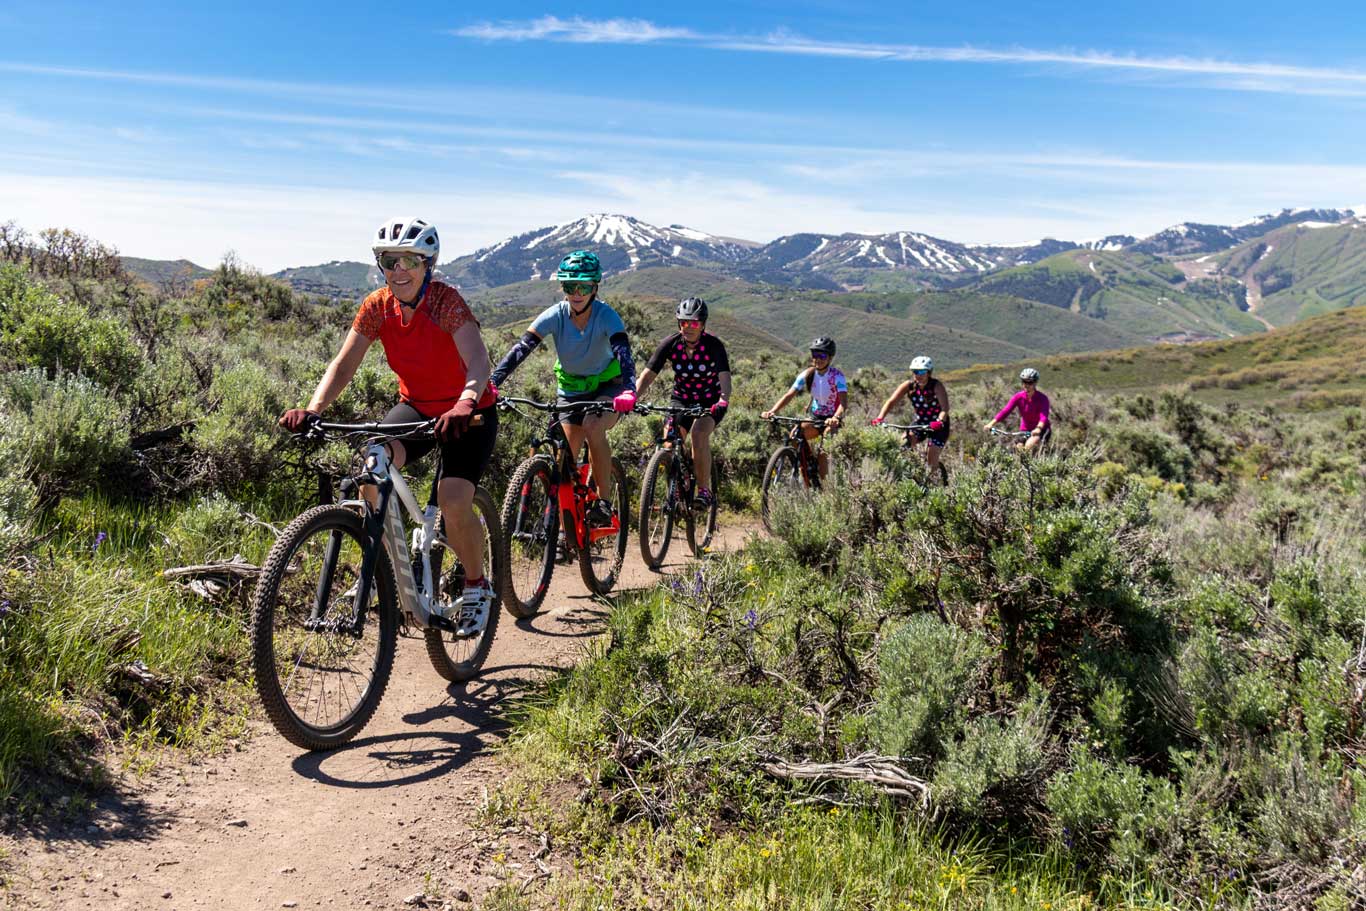 A group of women riding mountain bikes in Round Valley, Park City, UT.